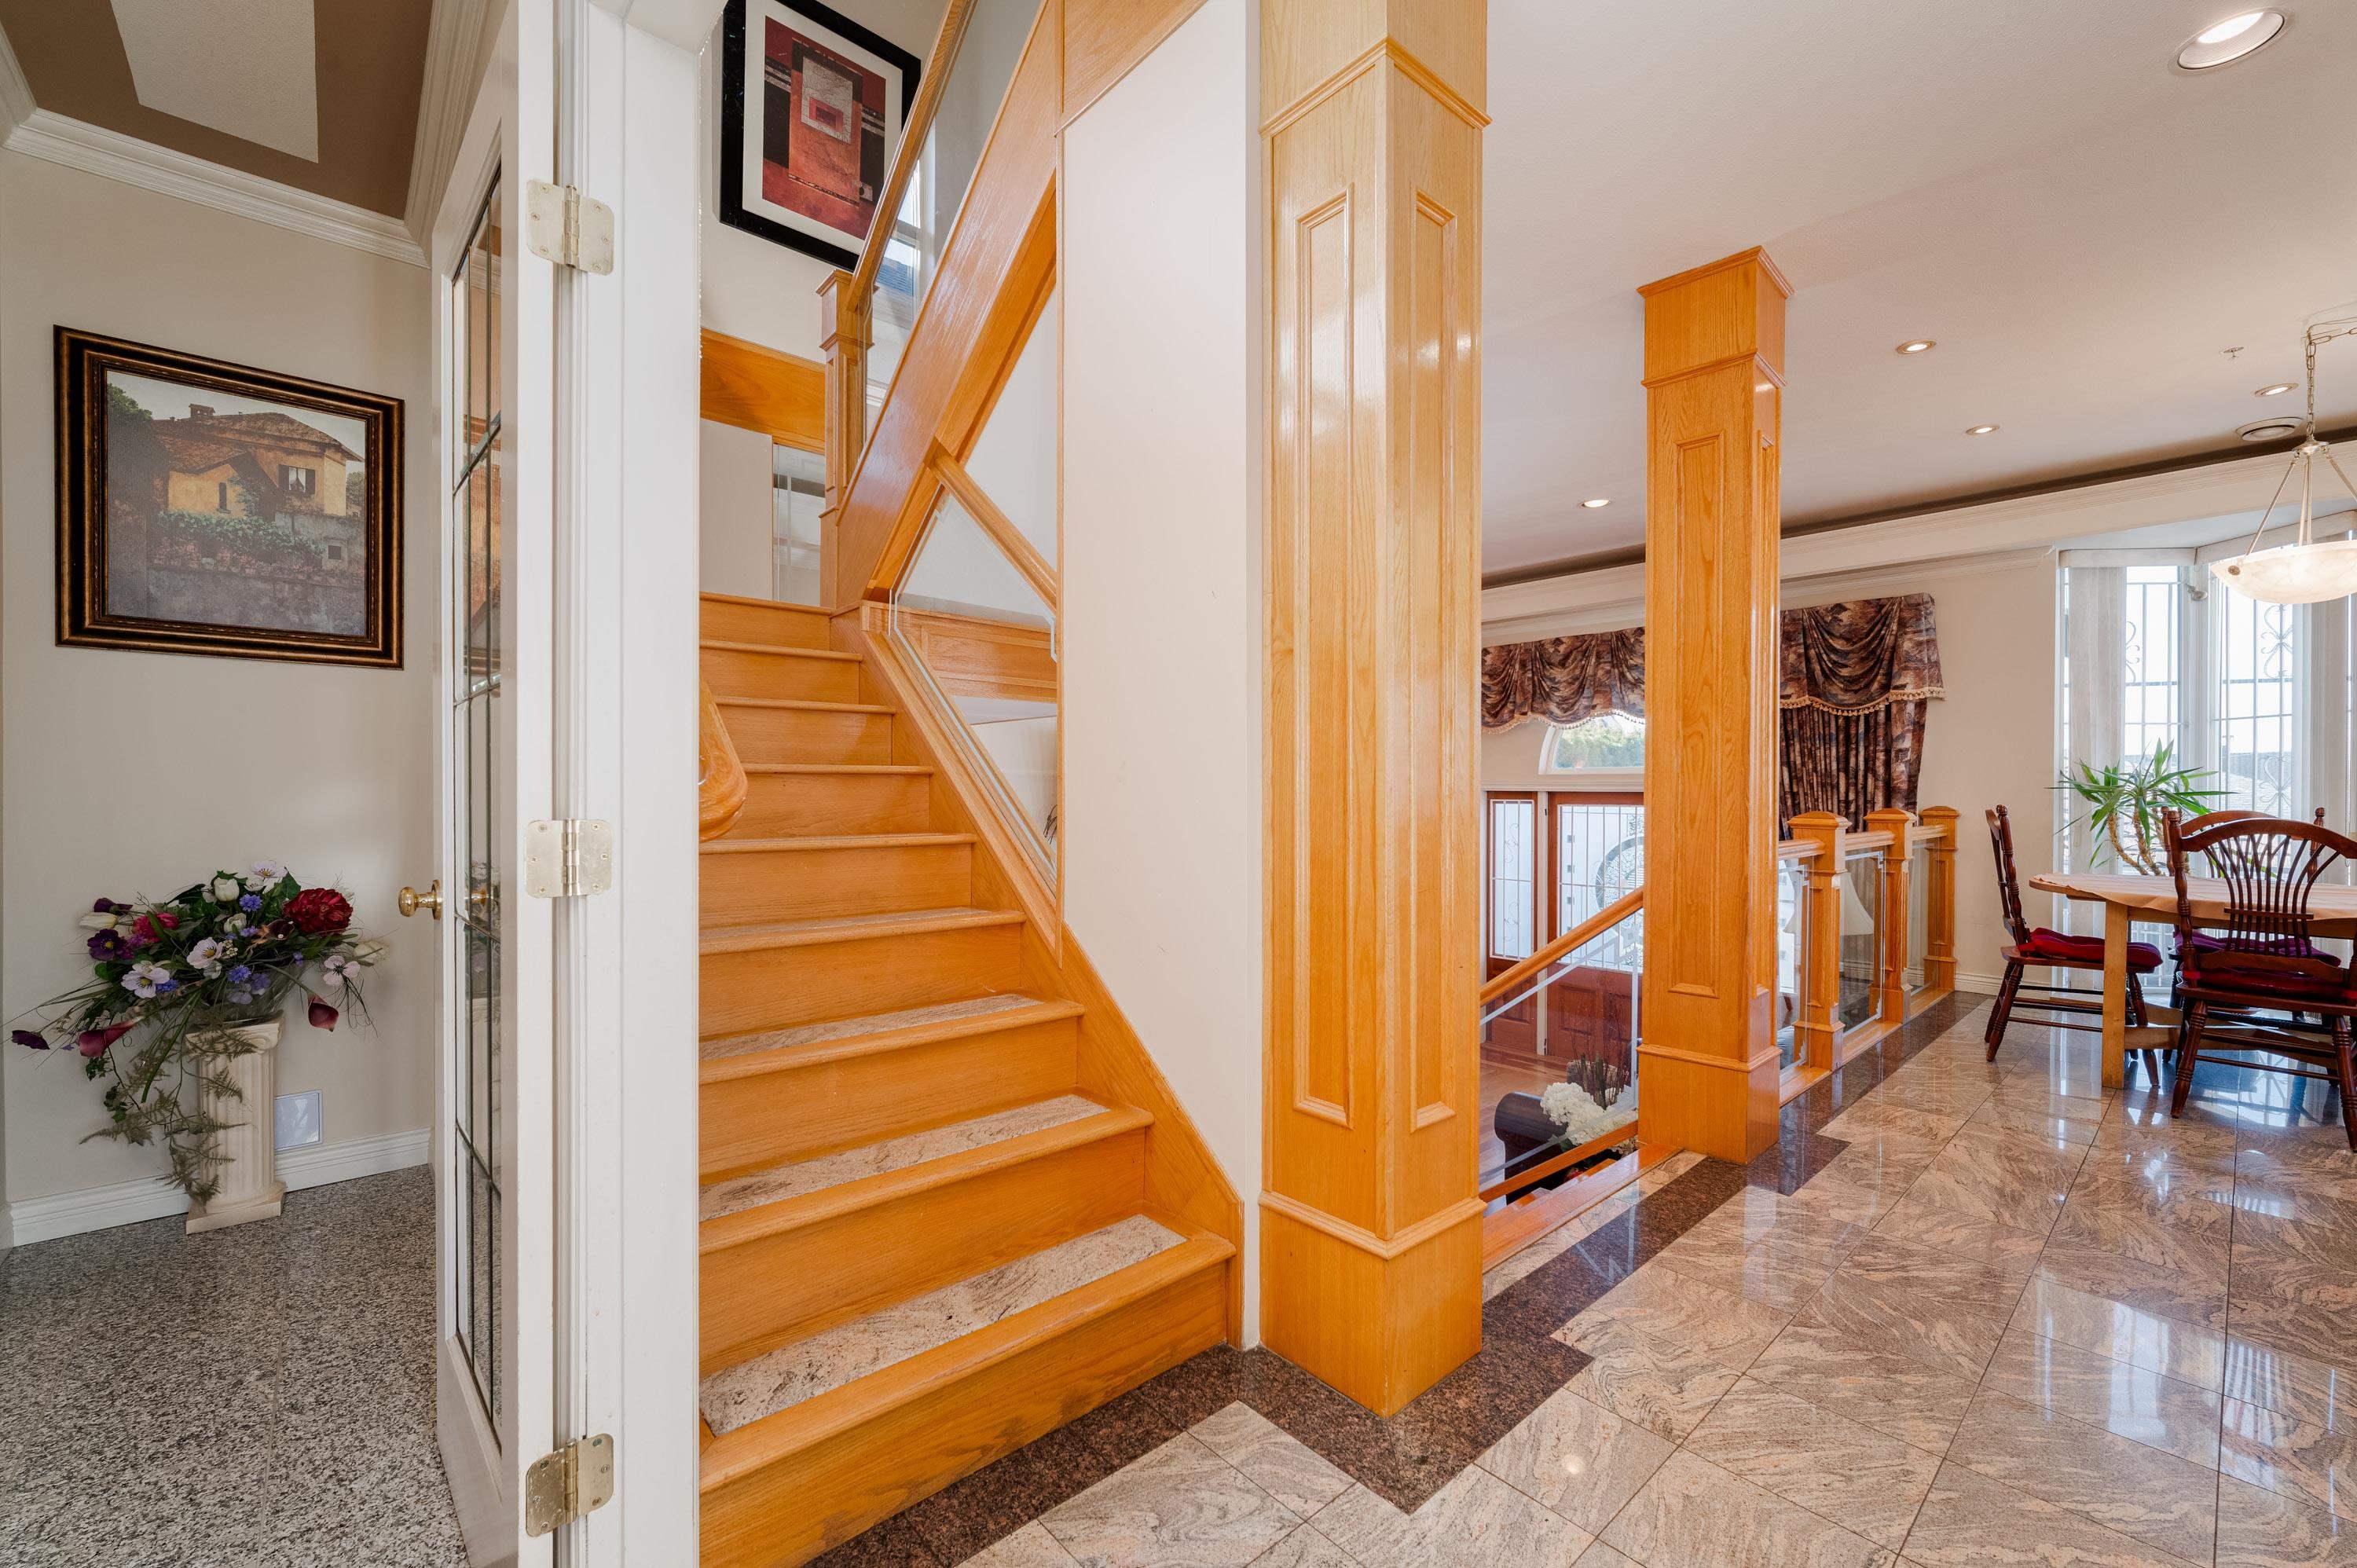 Listing image of 4105 SLOCAN STREET